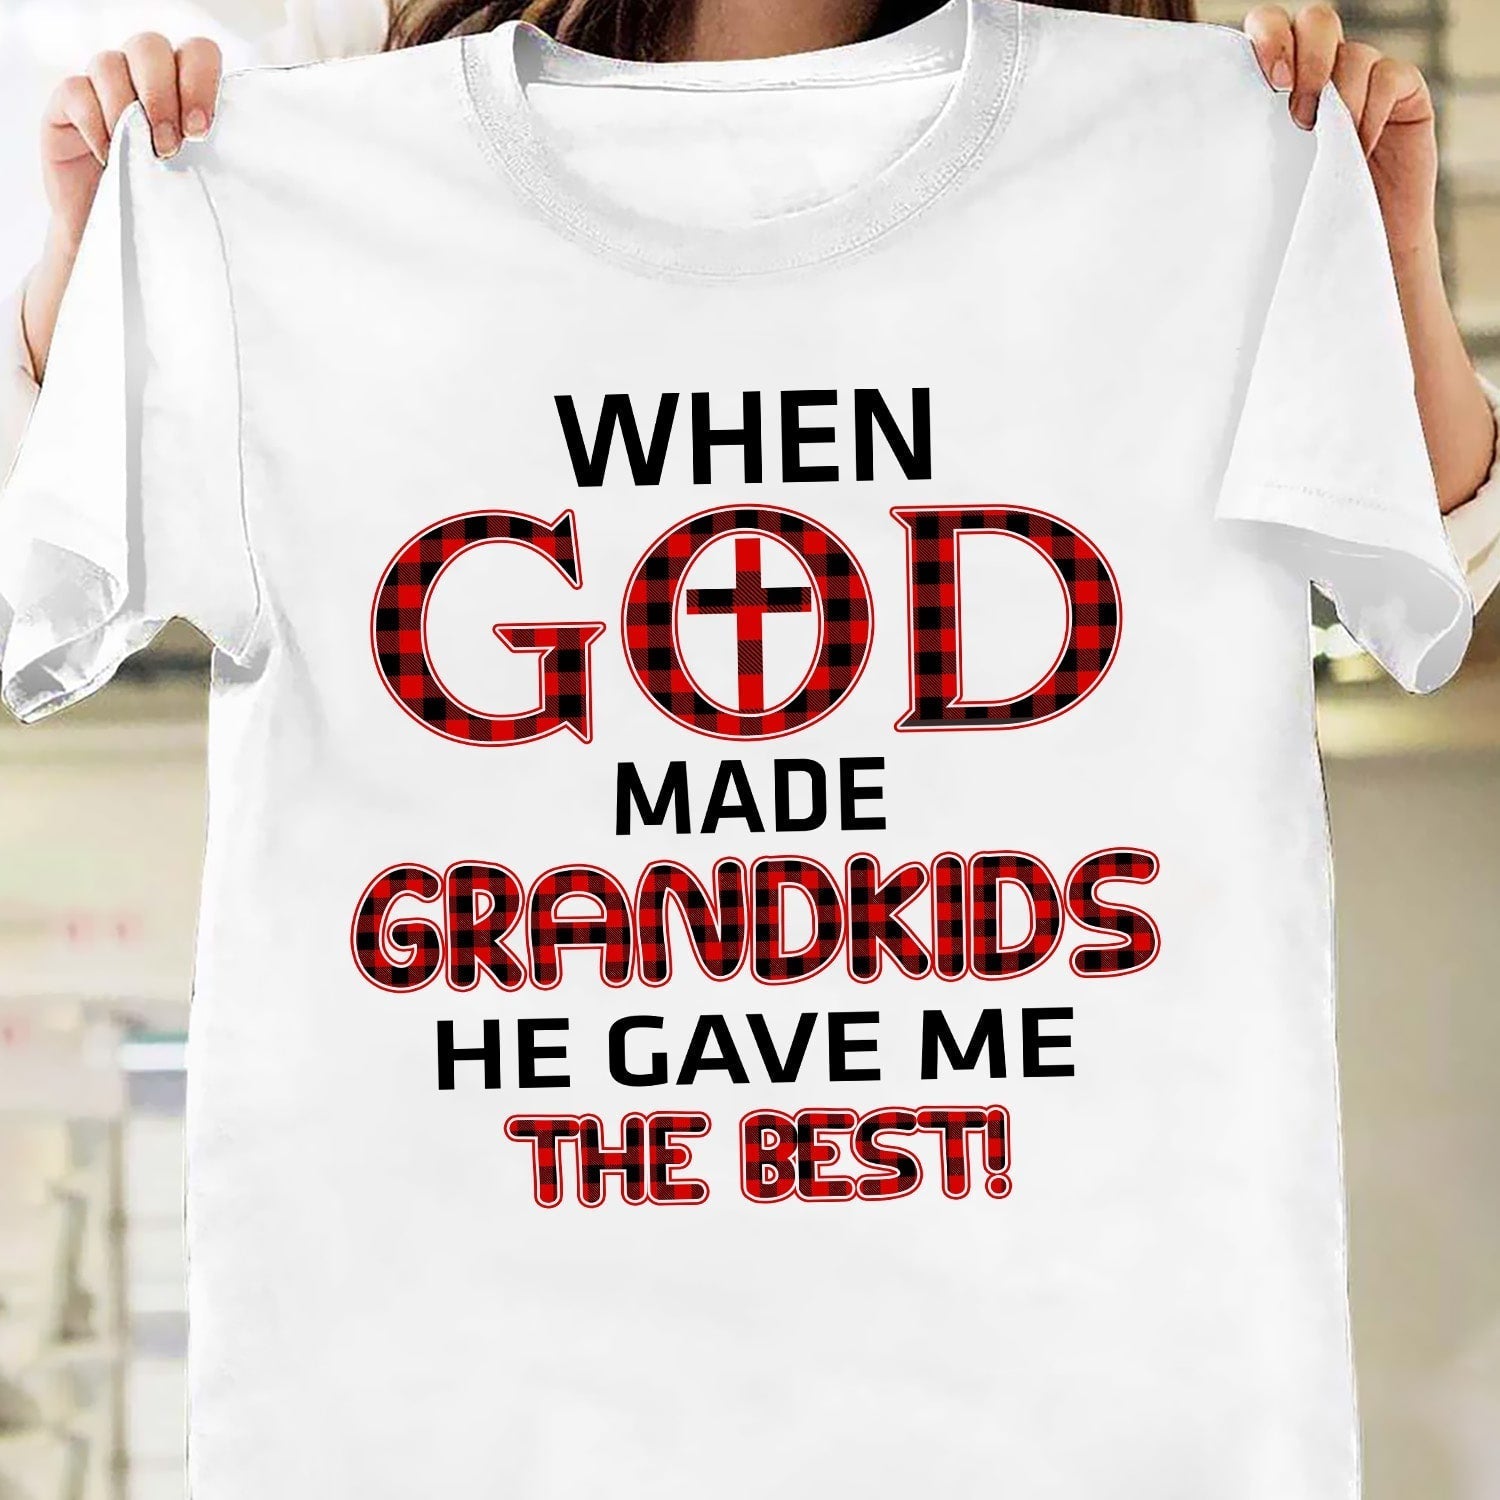 When god made grandkids he gave me the best – Jesus T Shirt